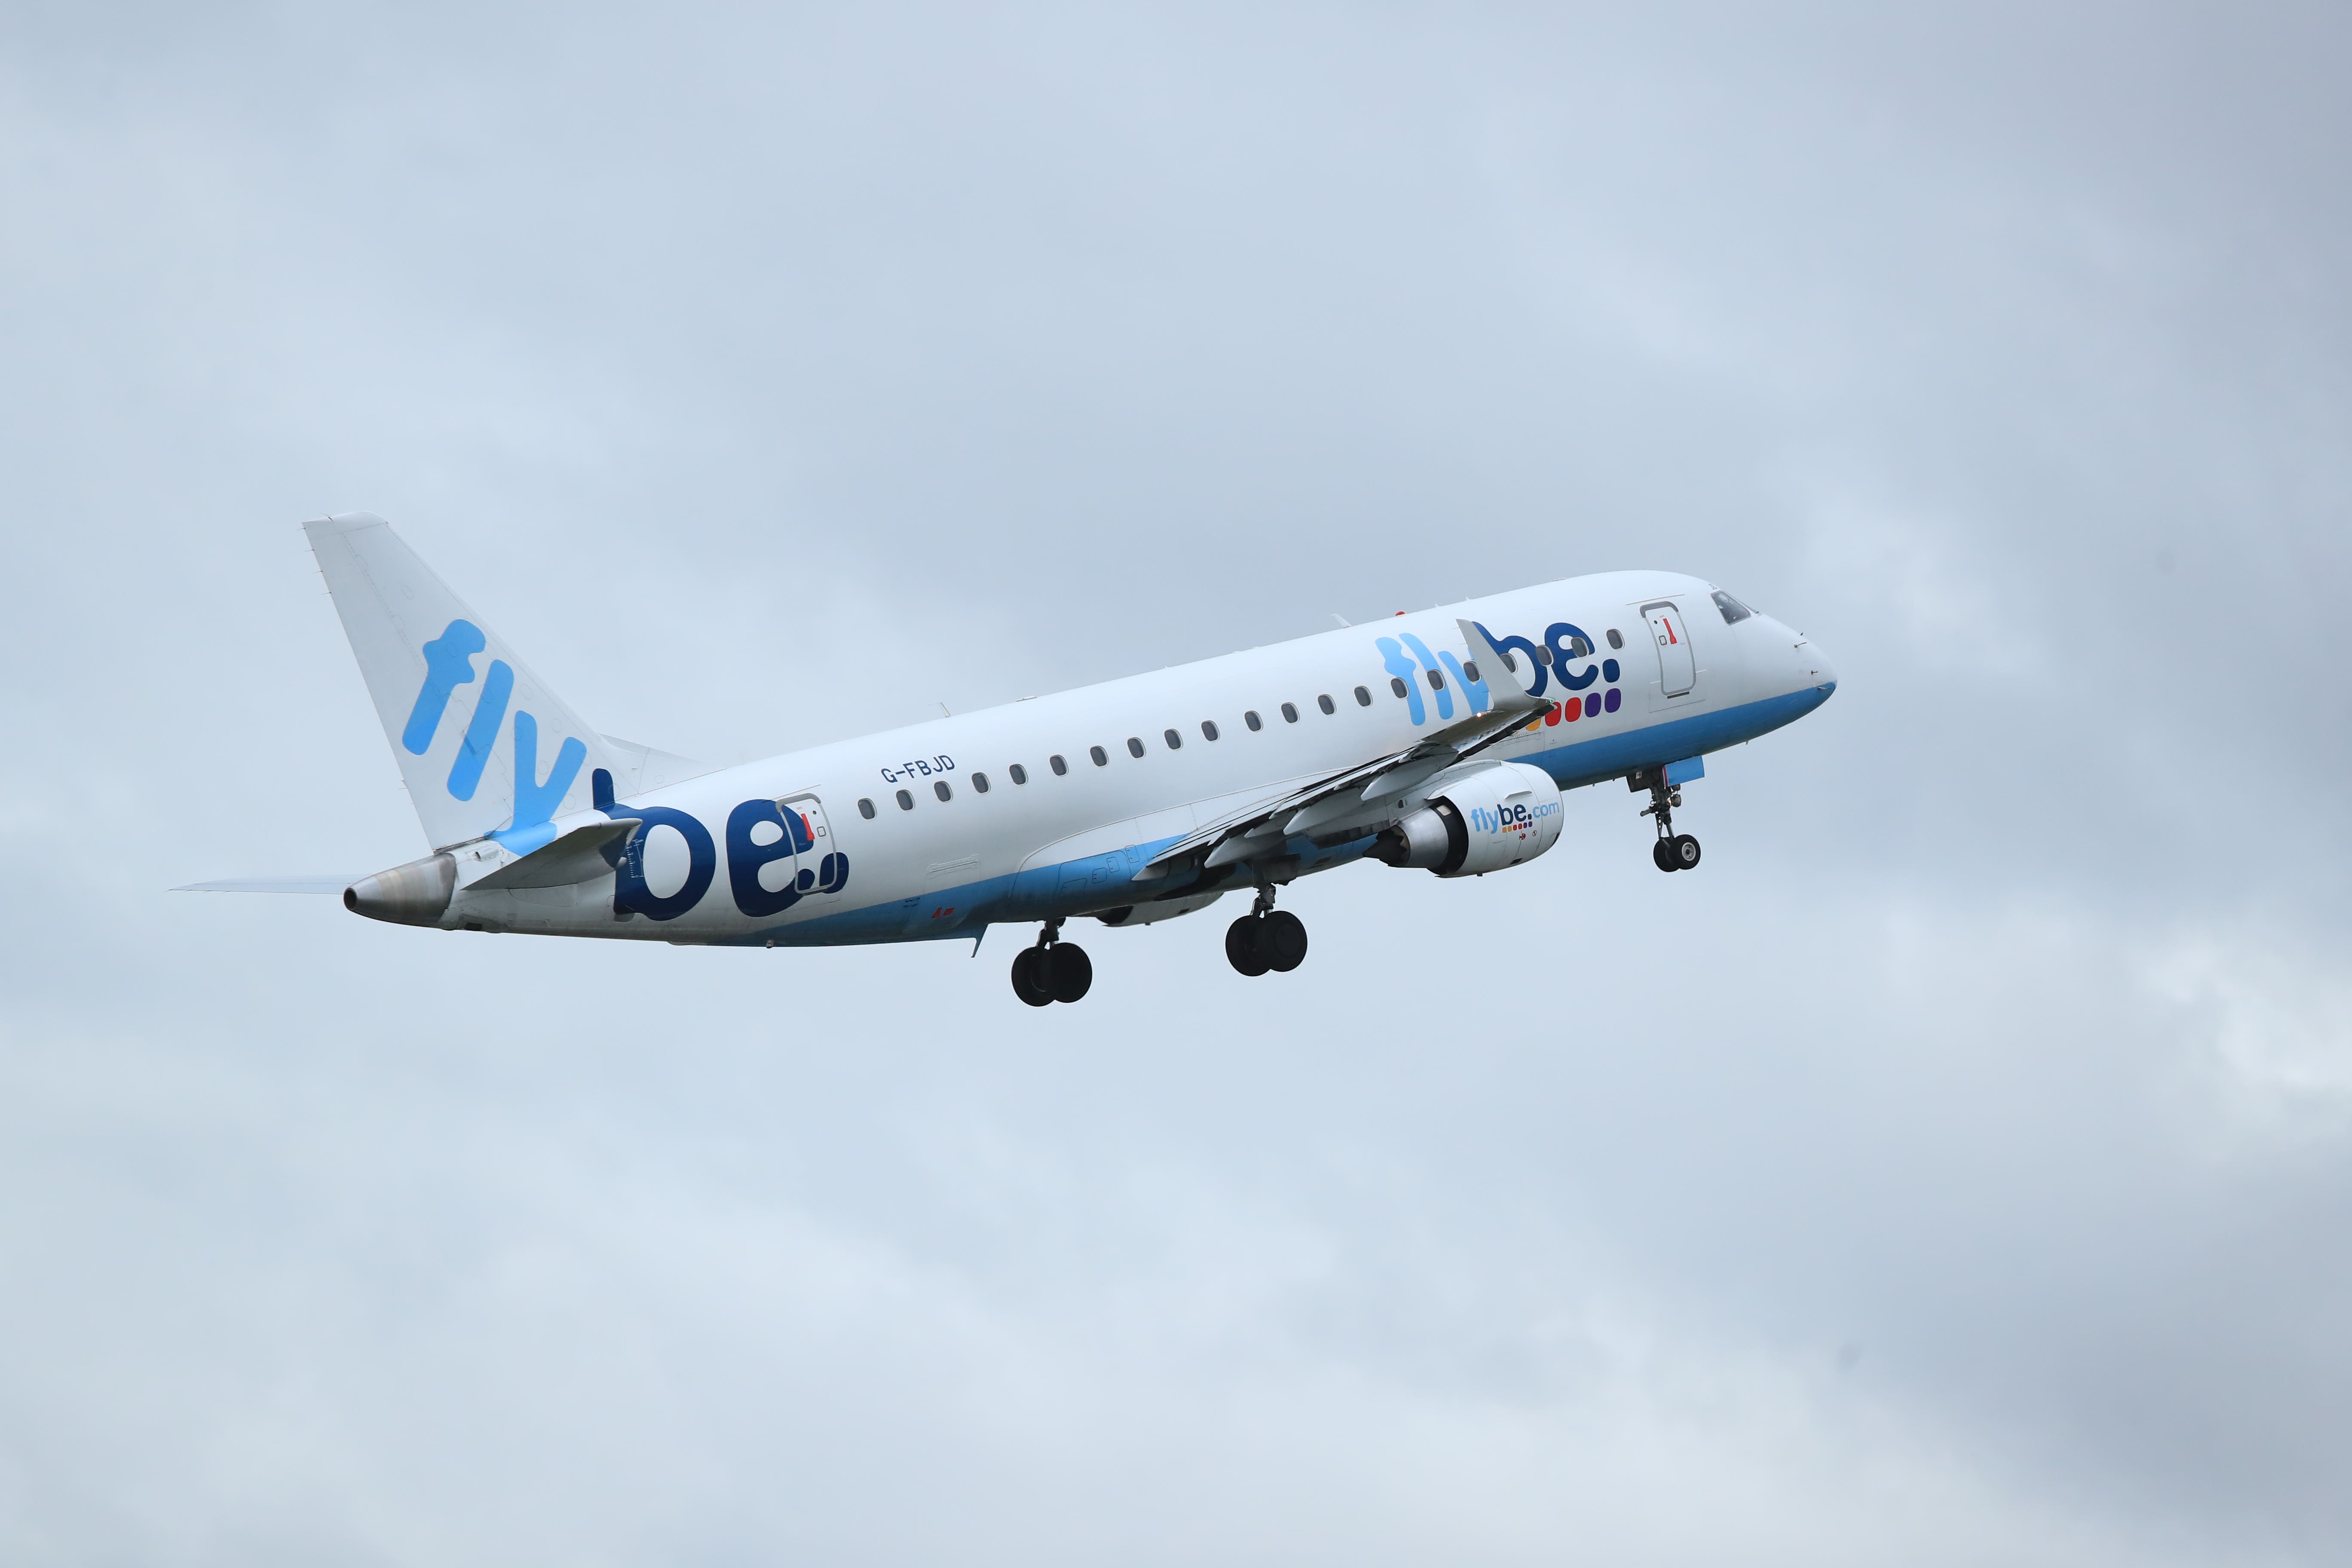 independent.co.uk - Benjamin Cooper - Scheduled flights cancelled after embattled airline Flybe ceases trading